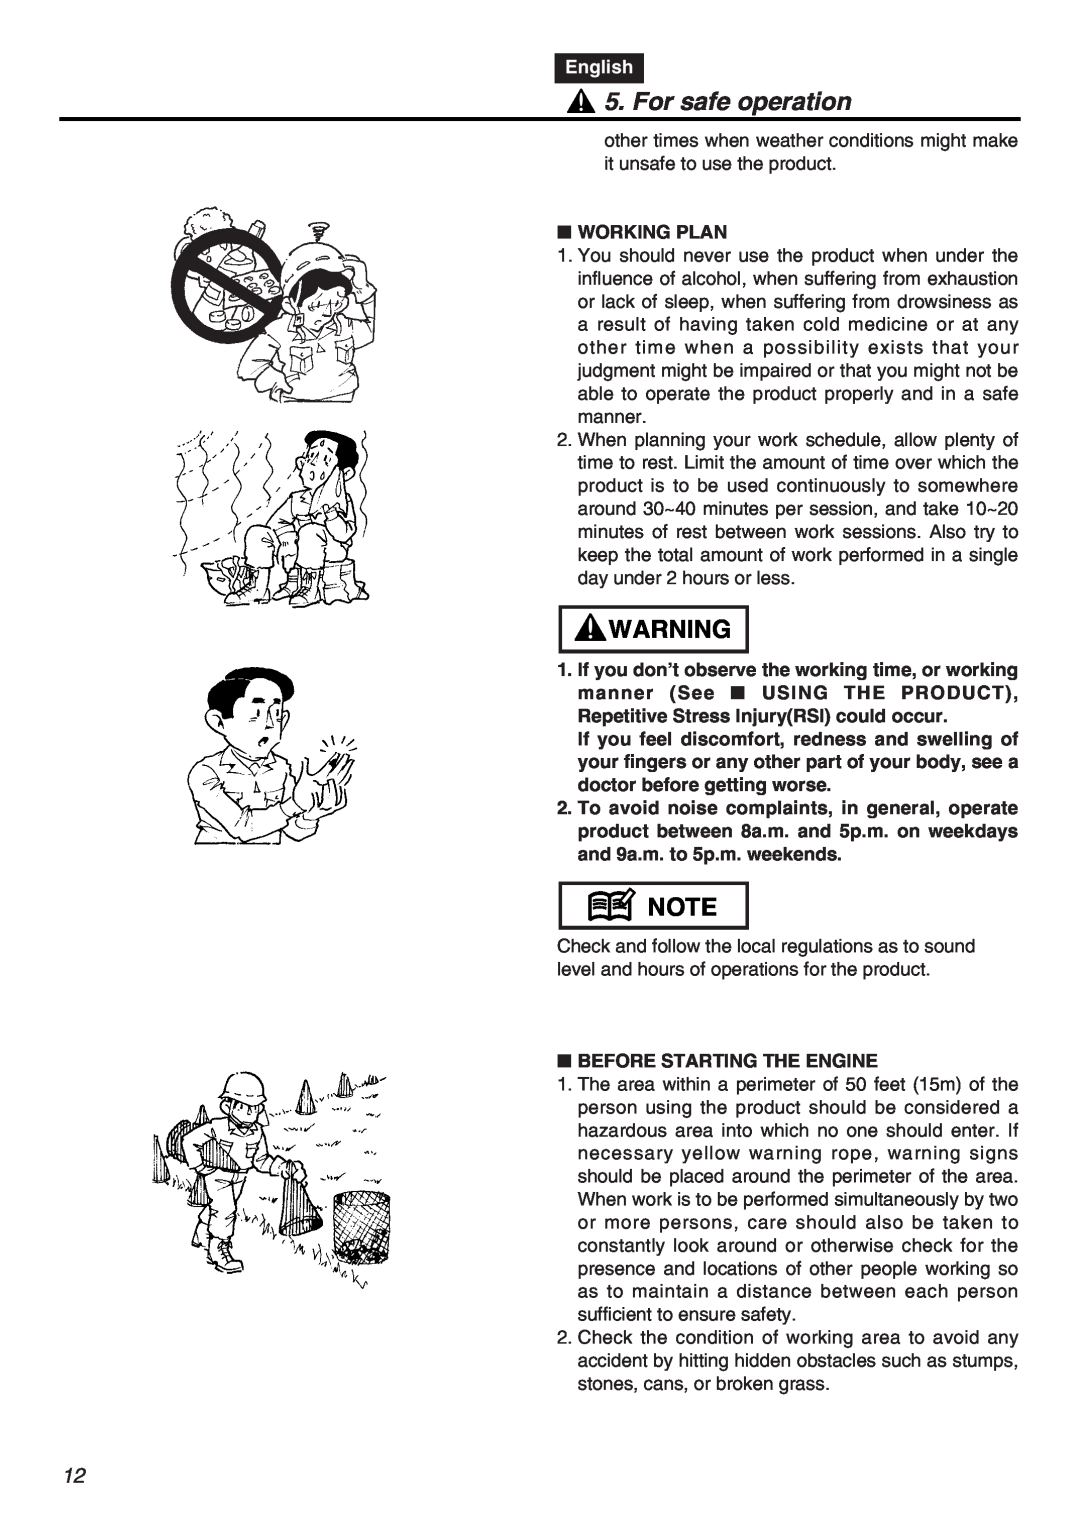 RedMax EXZ2401S-PH-CA manual For safe operation, English, Working Plan, Repetitive Stress InjuryRSI could occur 